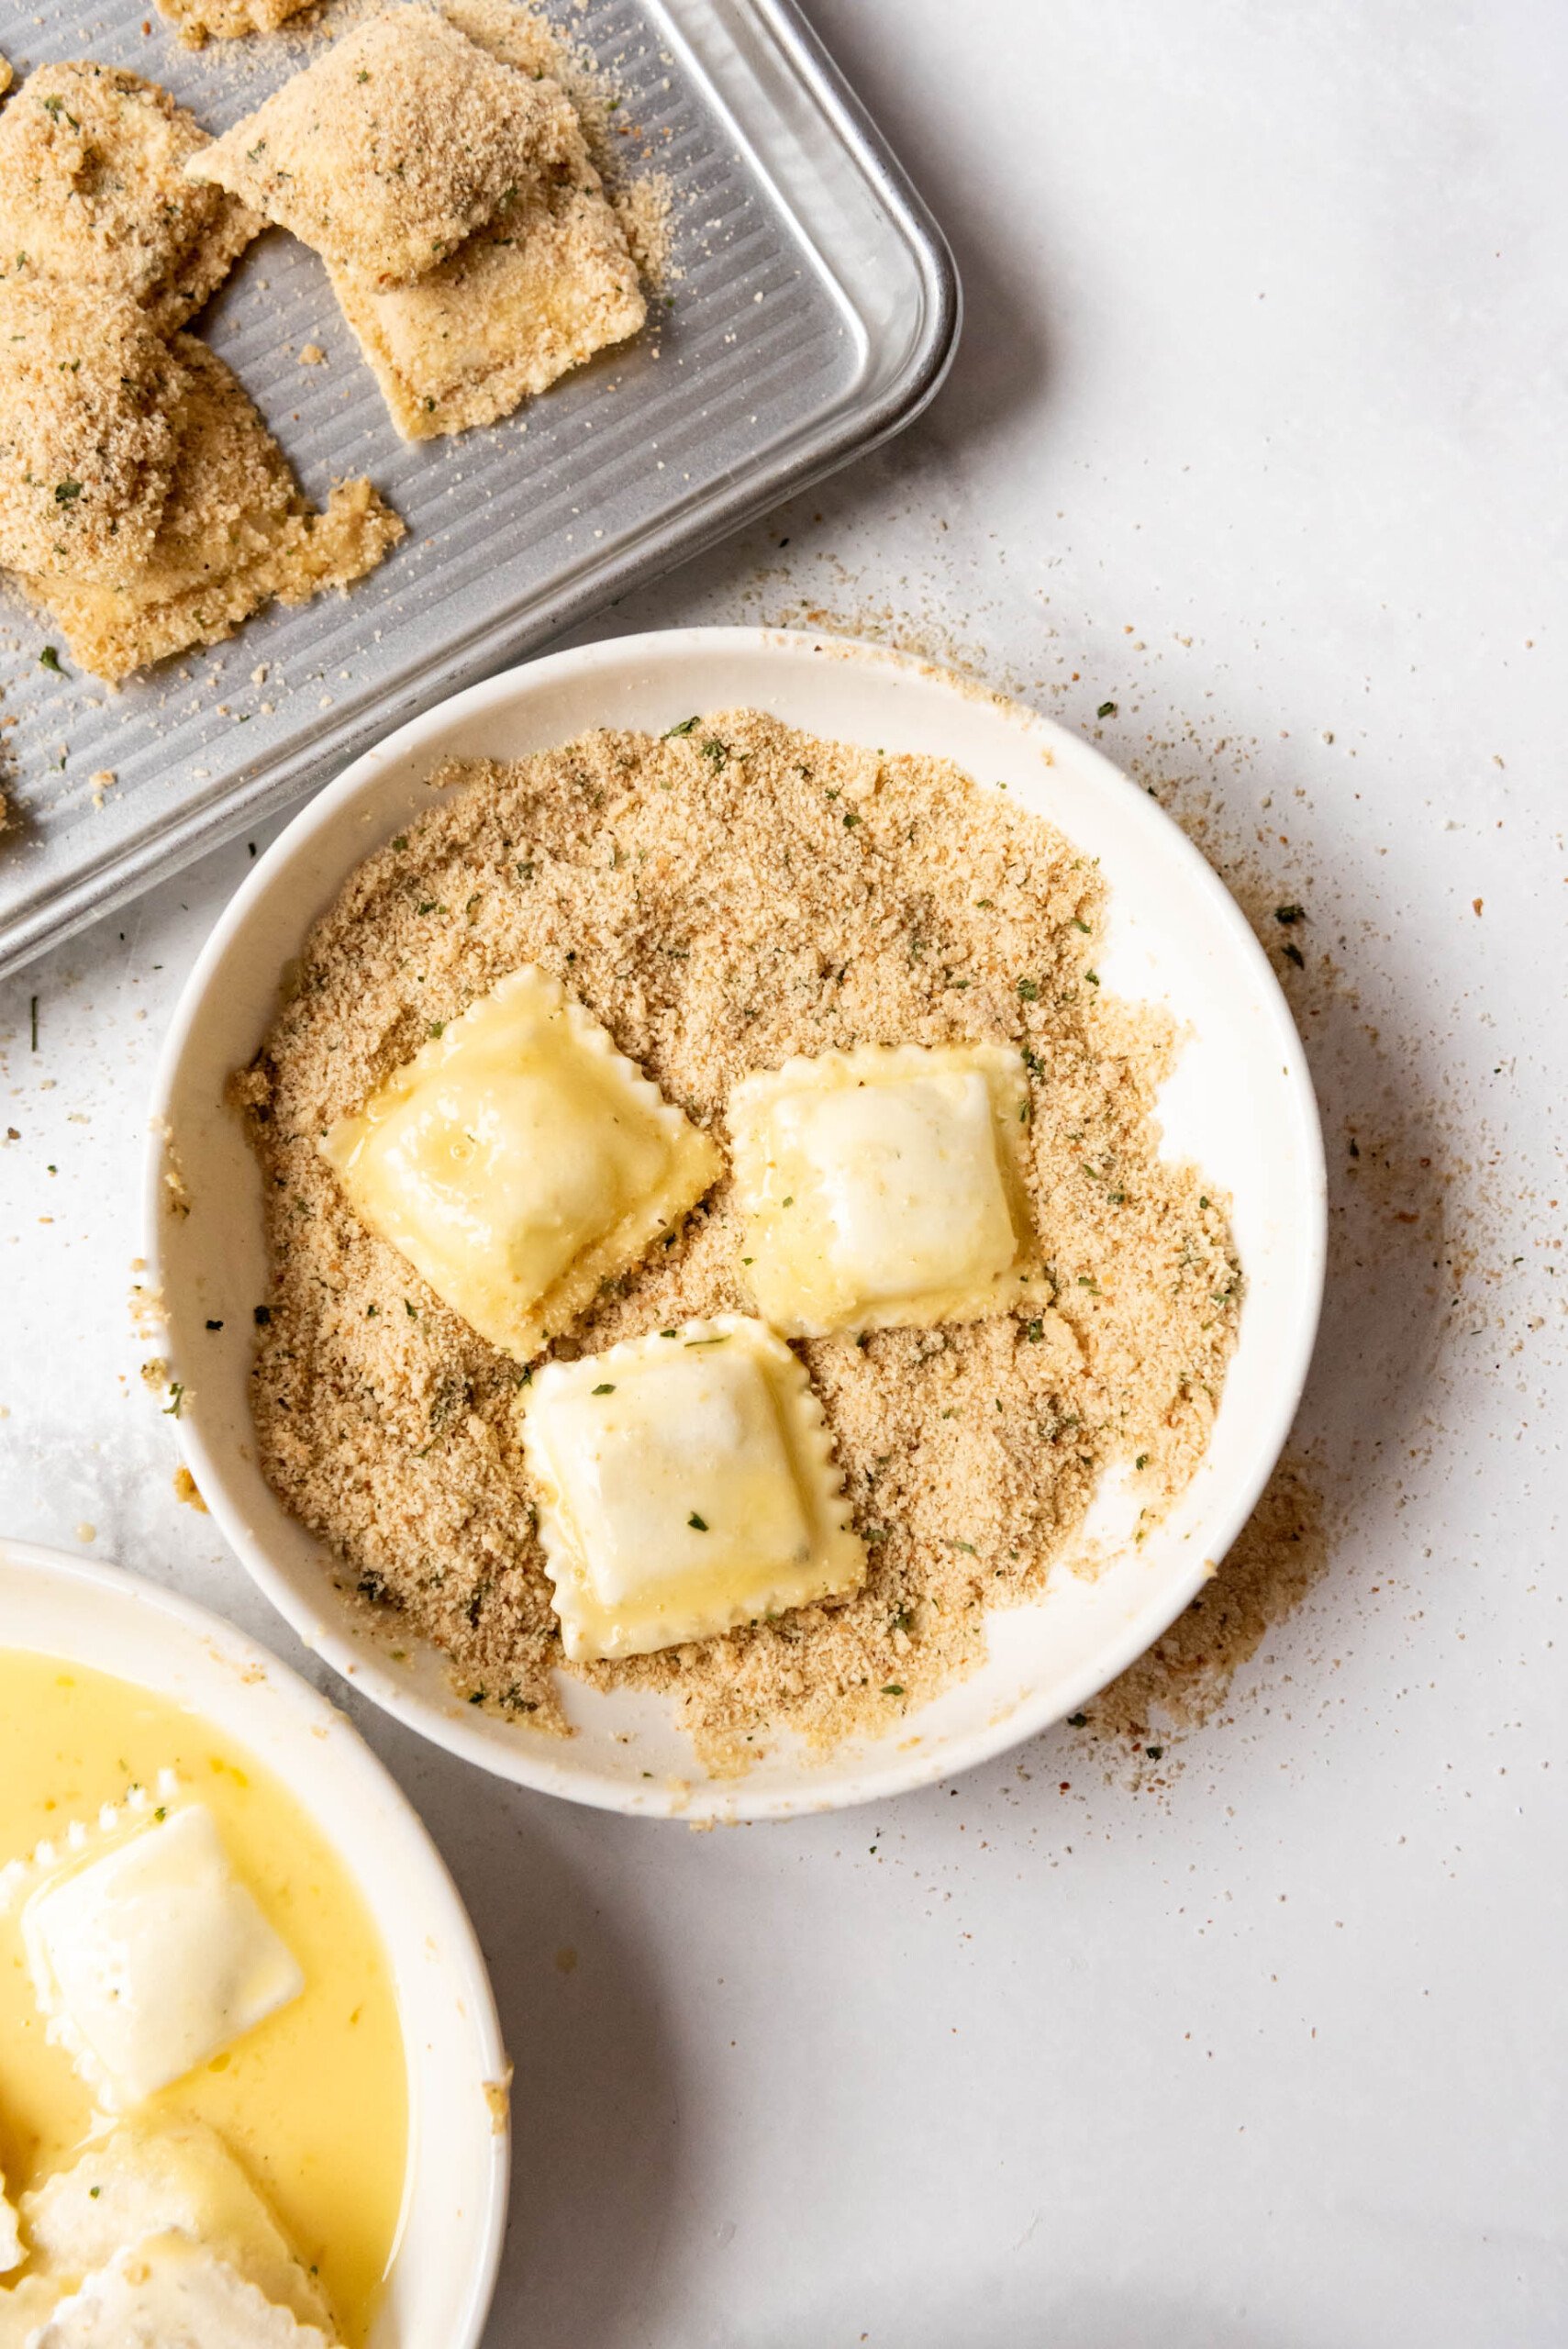 Three frozen ravioli coated with egg wash in a bowl of Italian breadcrumbs.